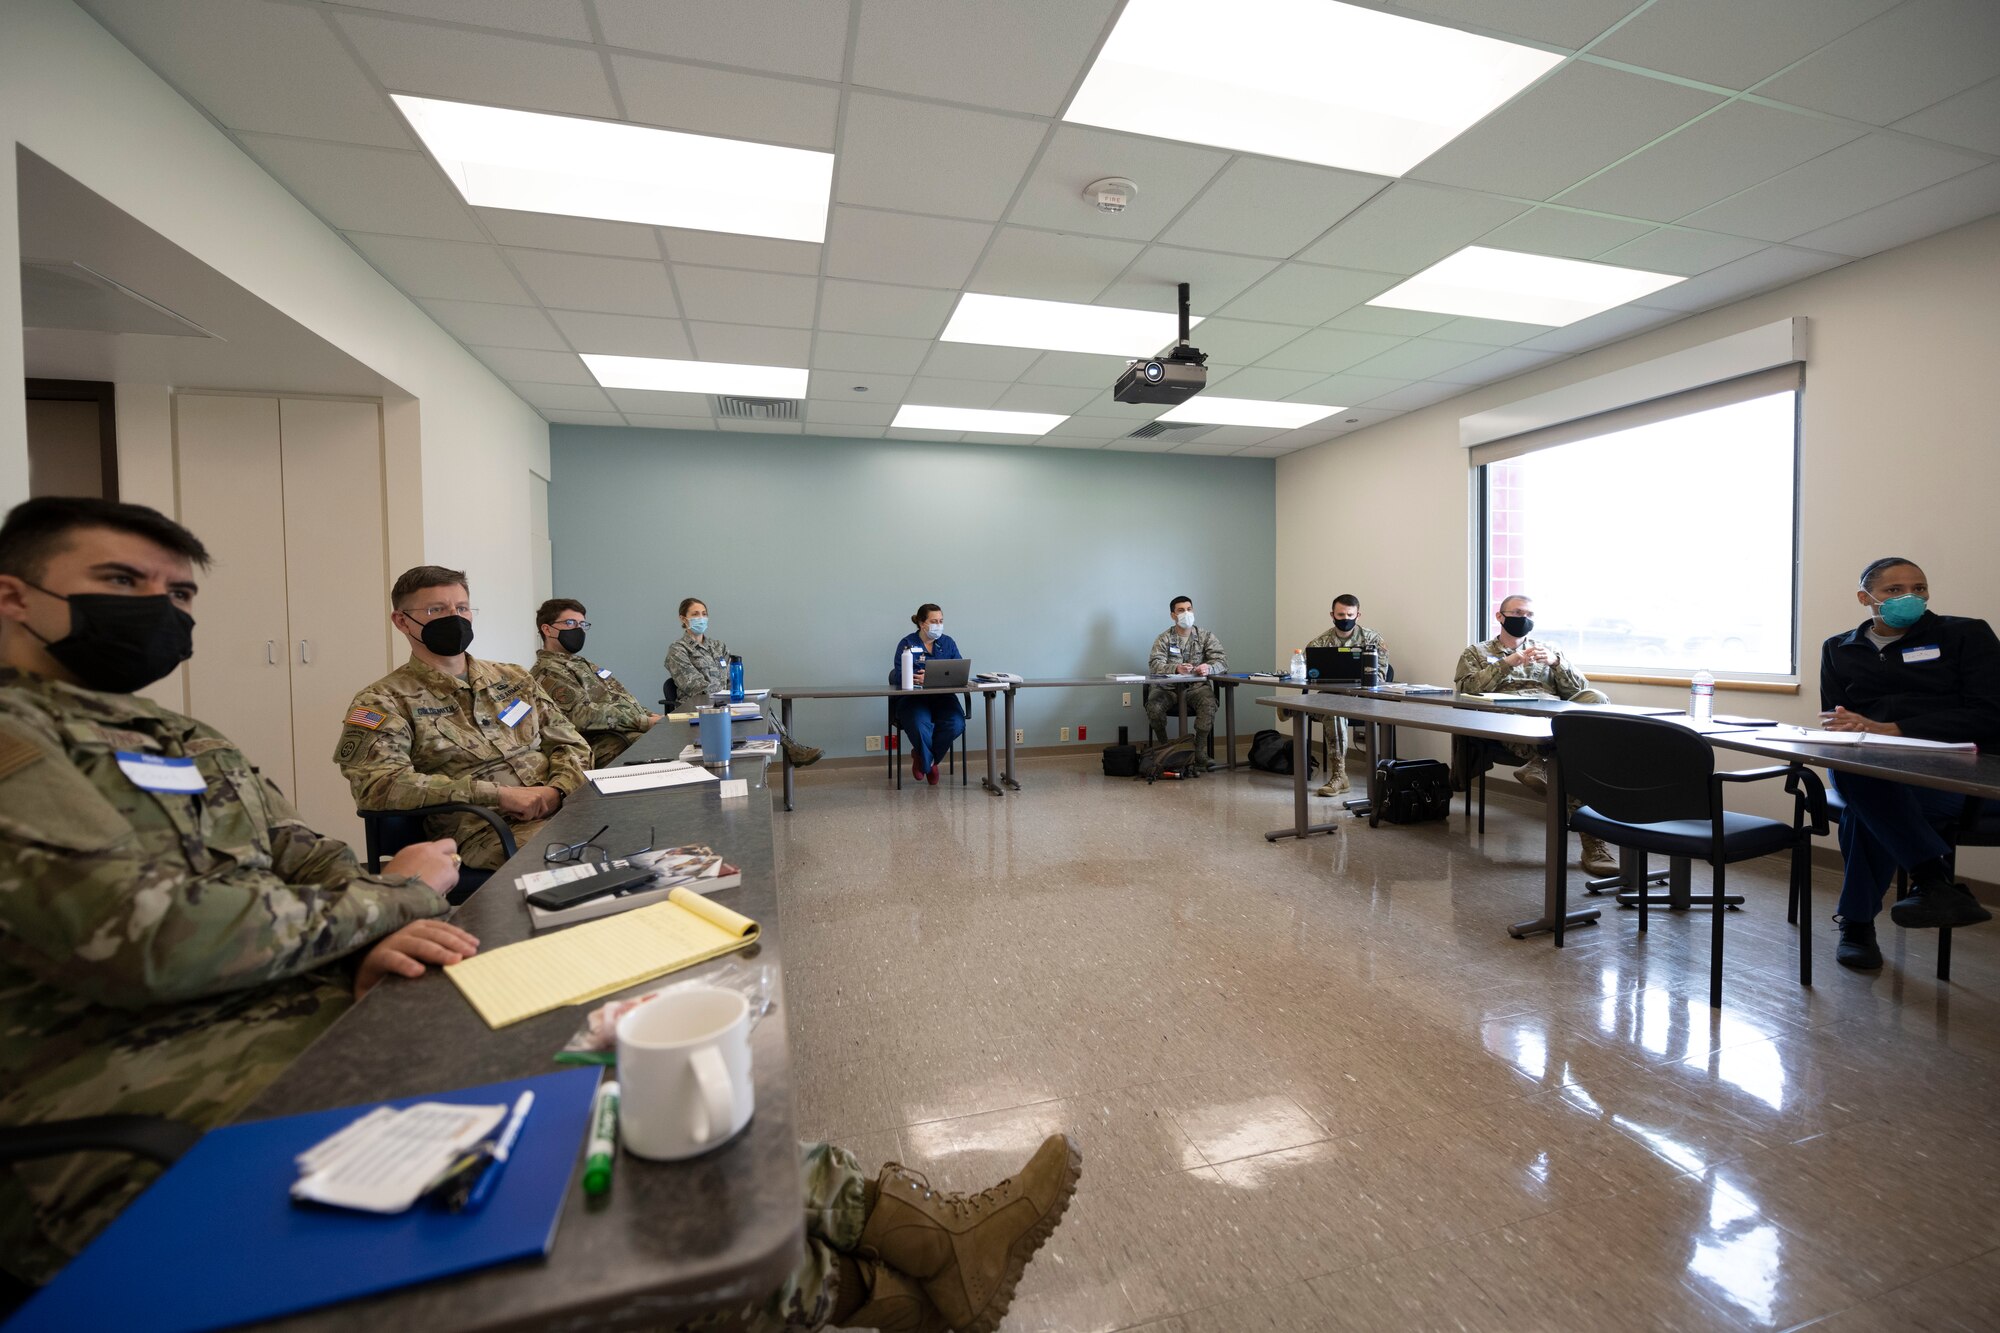 U.S. service members sit in a classroom during an Advanced Trauma Life Support course March 3, 2021, Travis Air Force Base, California. Nine service members participated in the ATLS training course at David Grant USAF Medical Center. ATLS equips different specialties in the medical field with the skills to treat traumatic injuries. (U.S. Air Force photo by Airman 1st Class Alexander Merchak)